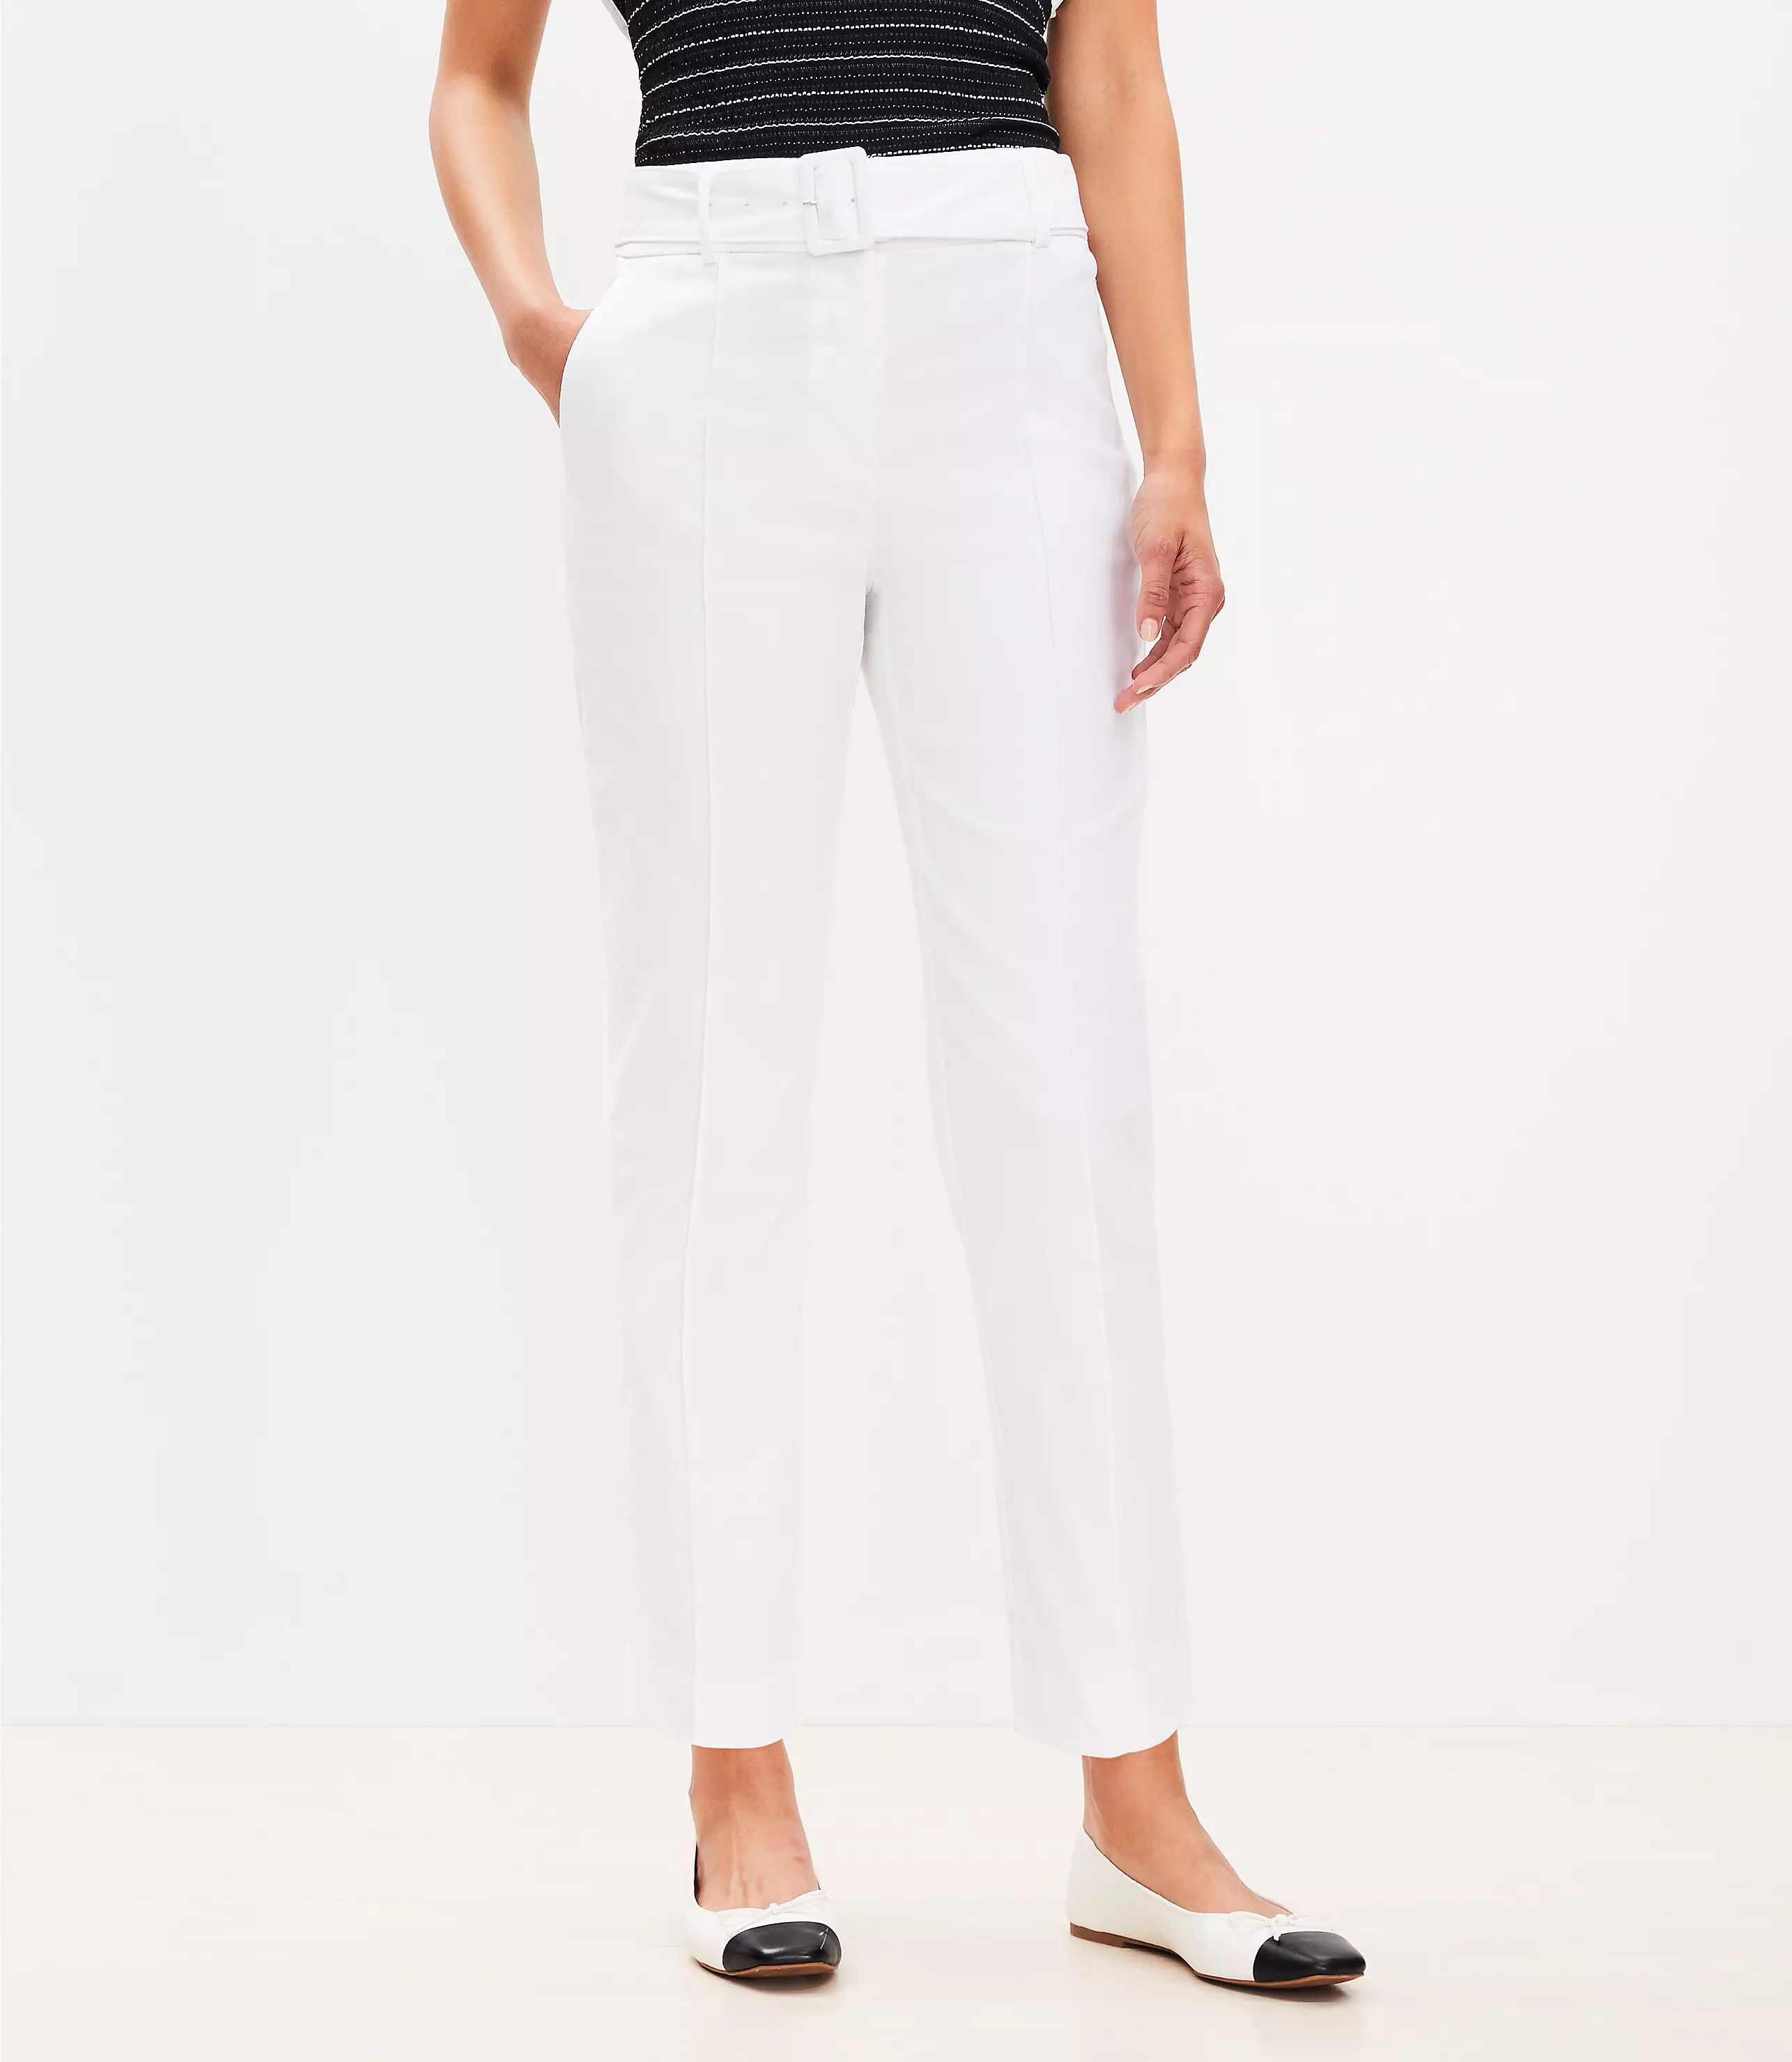 Petite Pintucked Belted Slim Pants in Stretch Linen Blend | LOFT